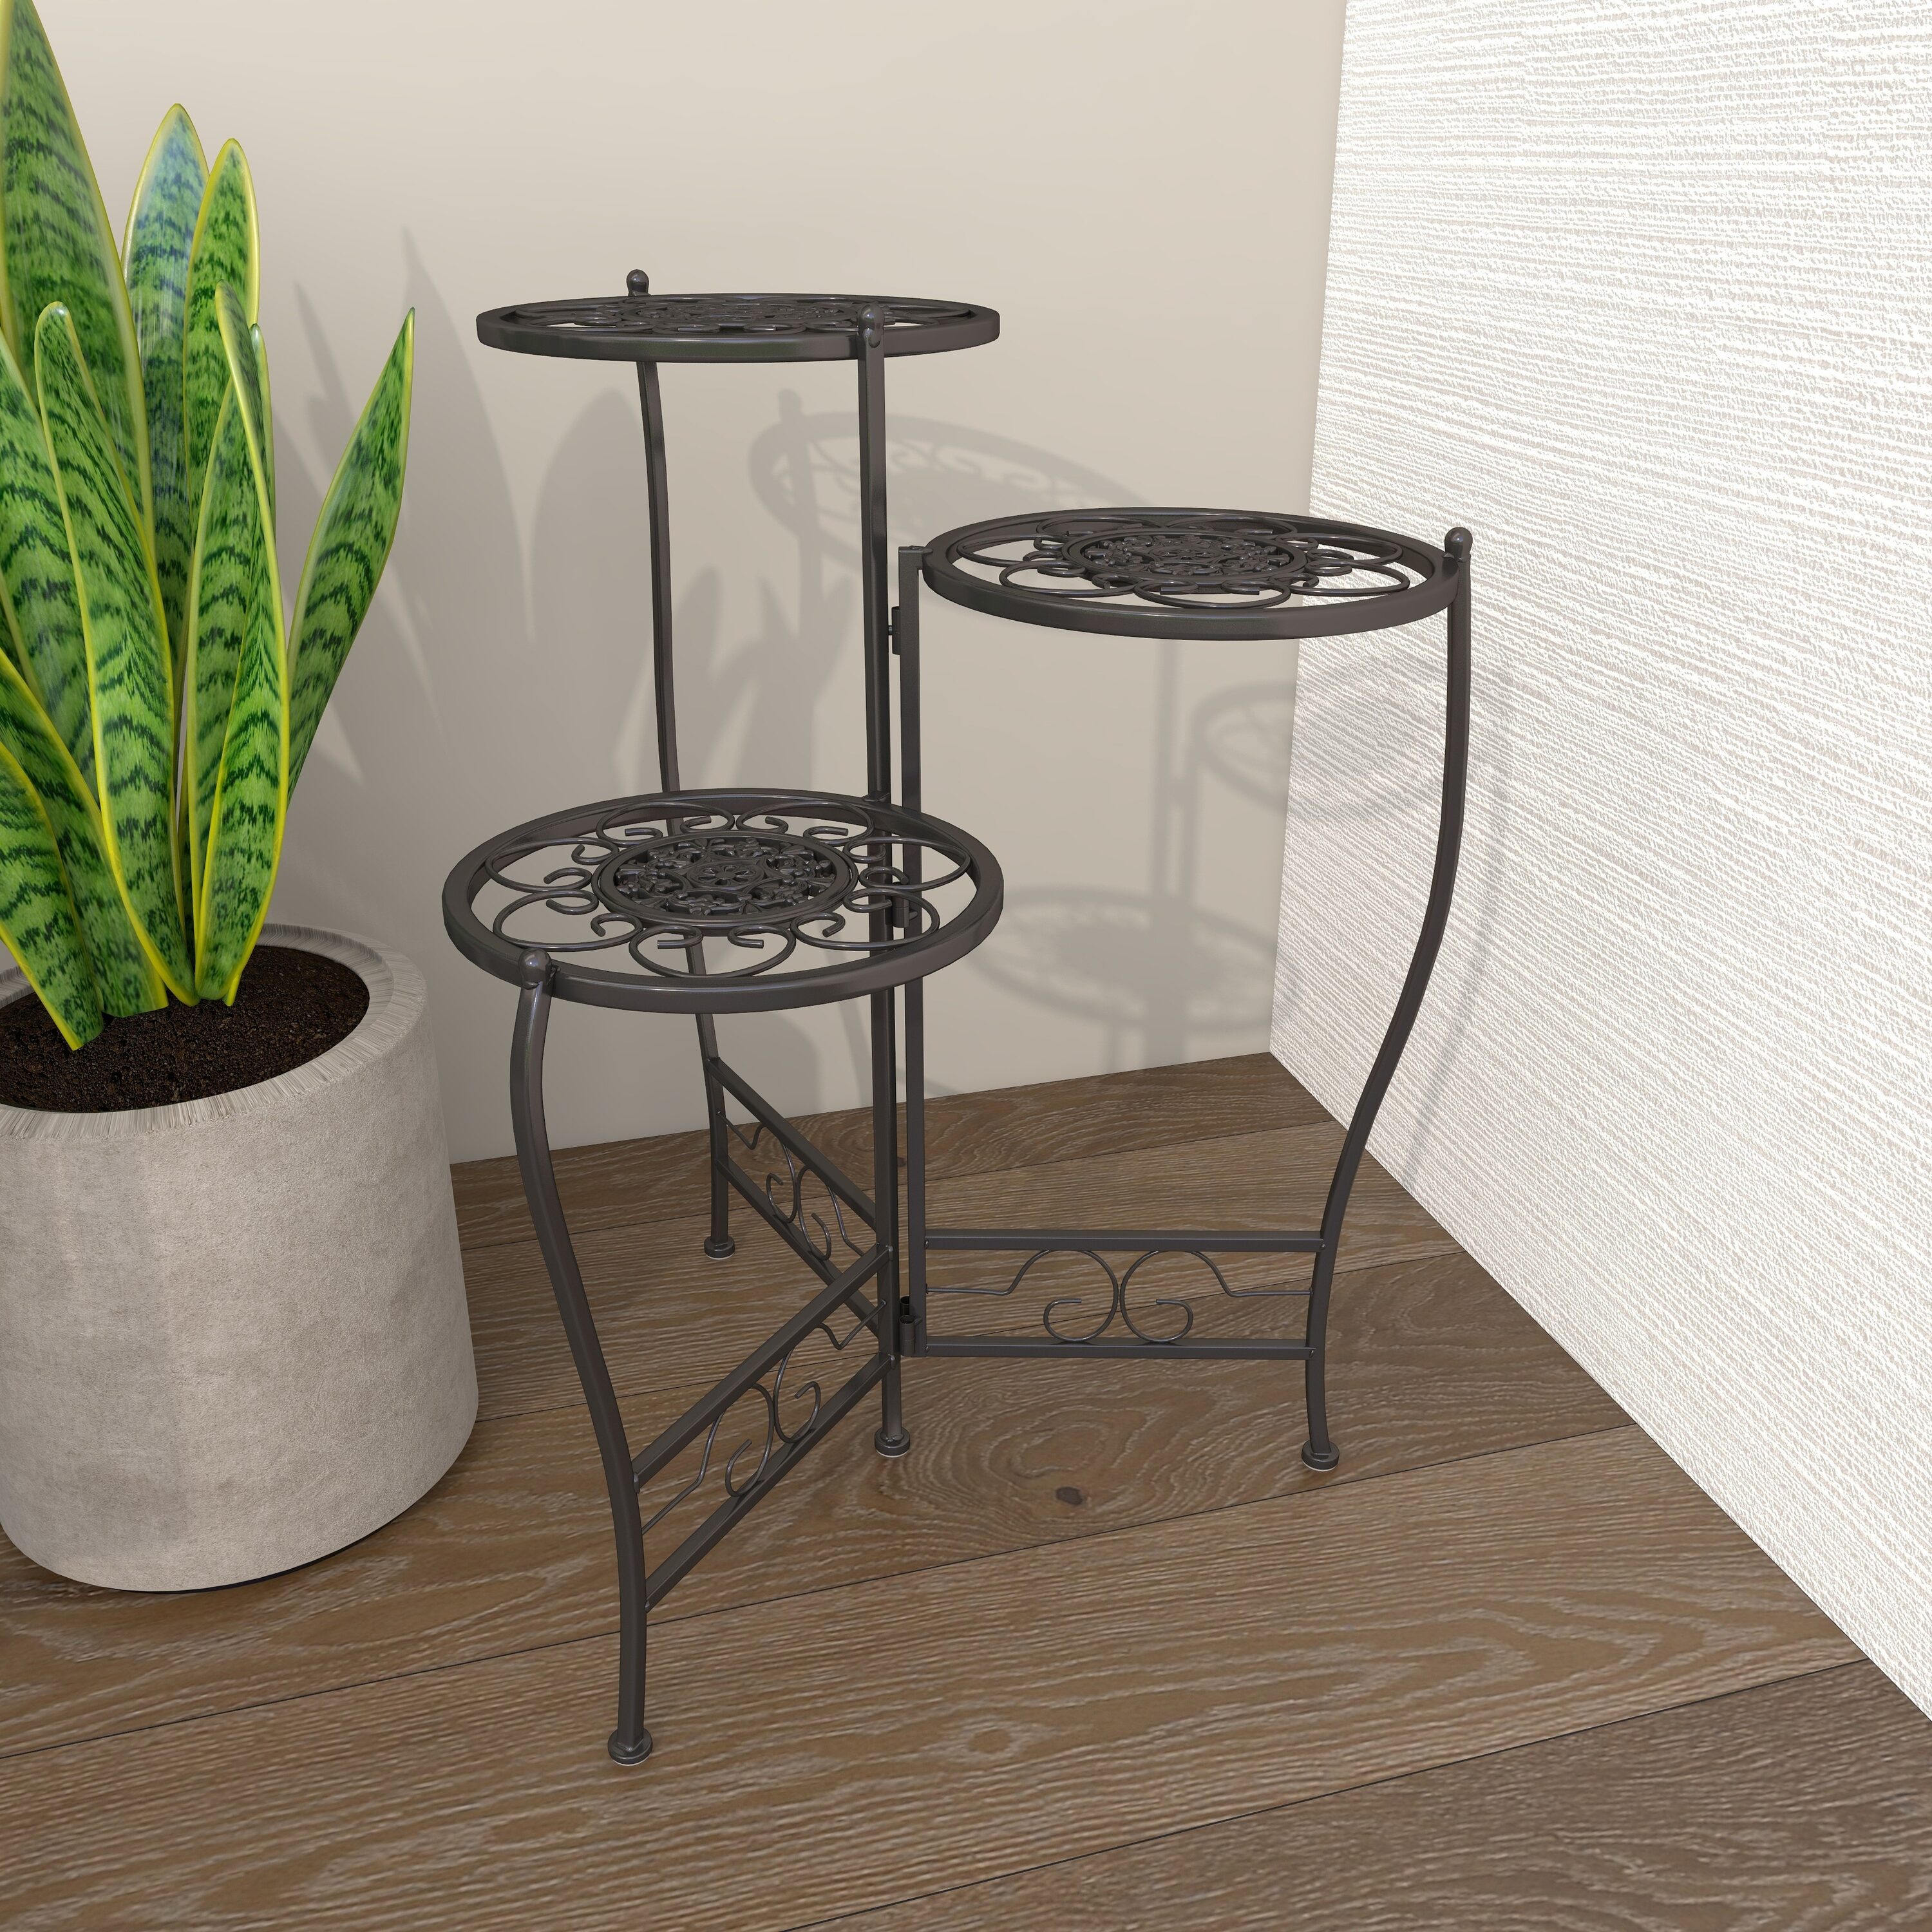 Sunnydaze 3-Tier Metal Iron Plant Stand with Scroll Edging